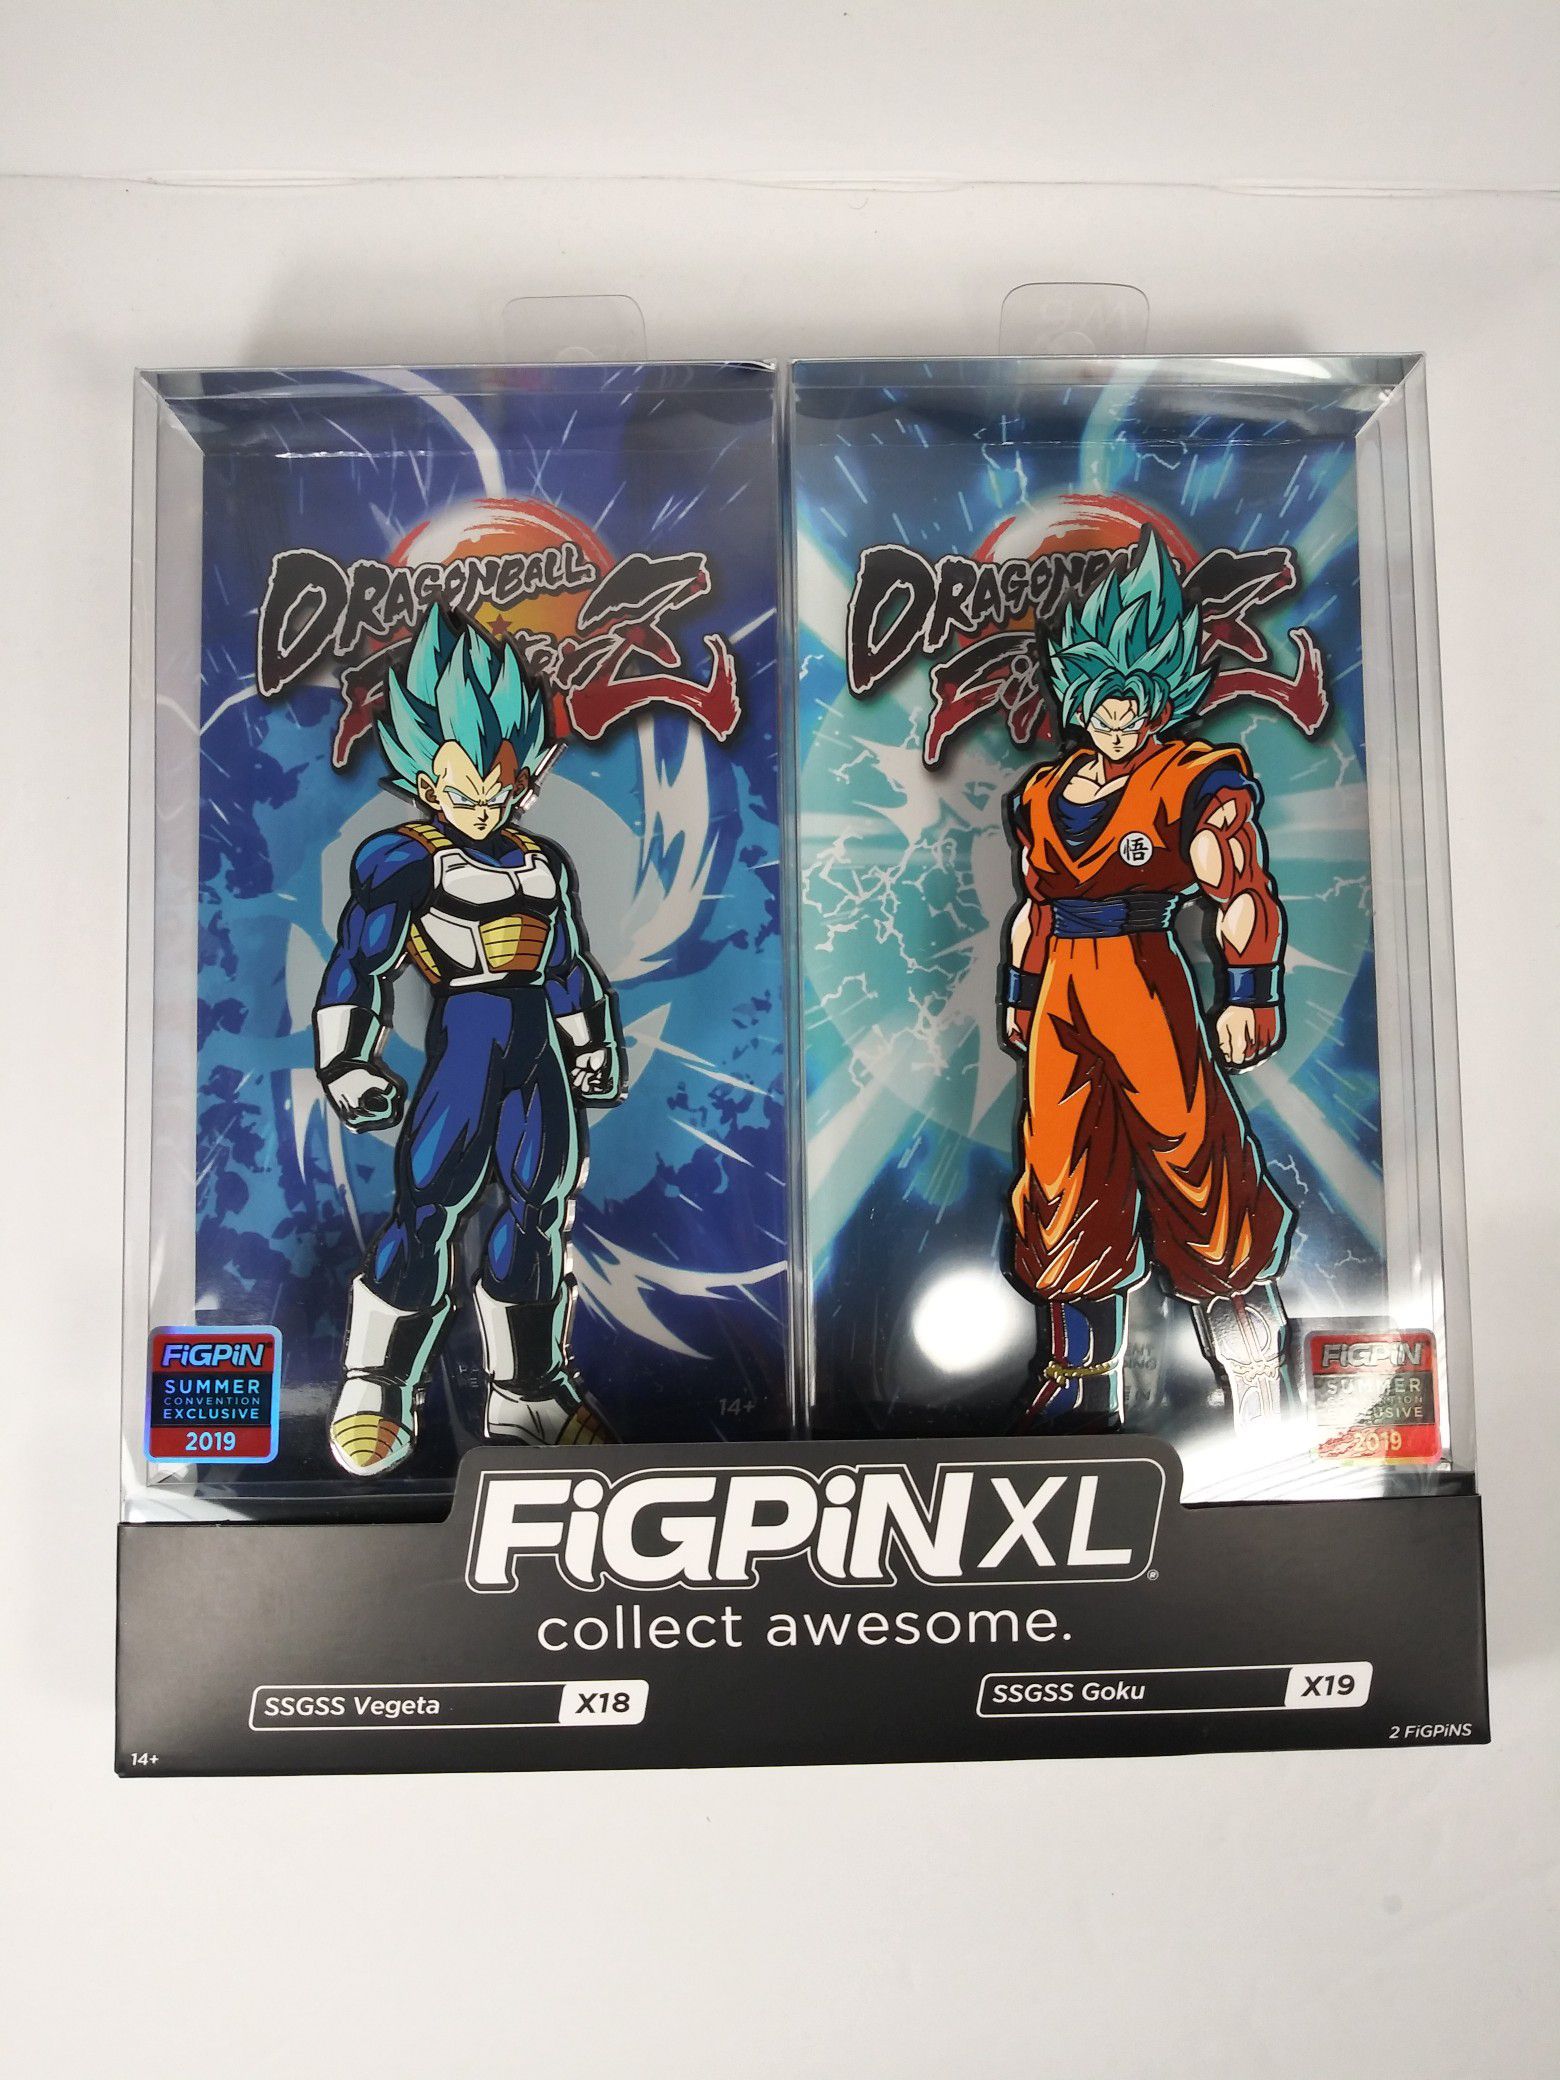 FIGPIN XL DRAGON BALL FIGHTER Z SSGSS GOKU VEGETA X18 X19 SDCC IN HAND NOW super. Condition is New. Shipped with USPS Priority Mail.